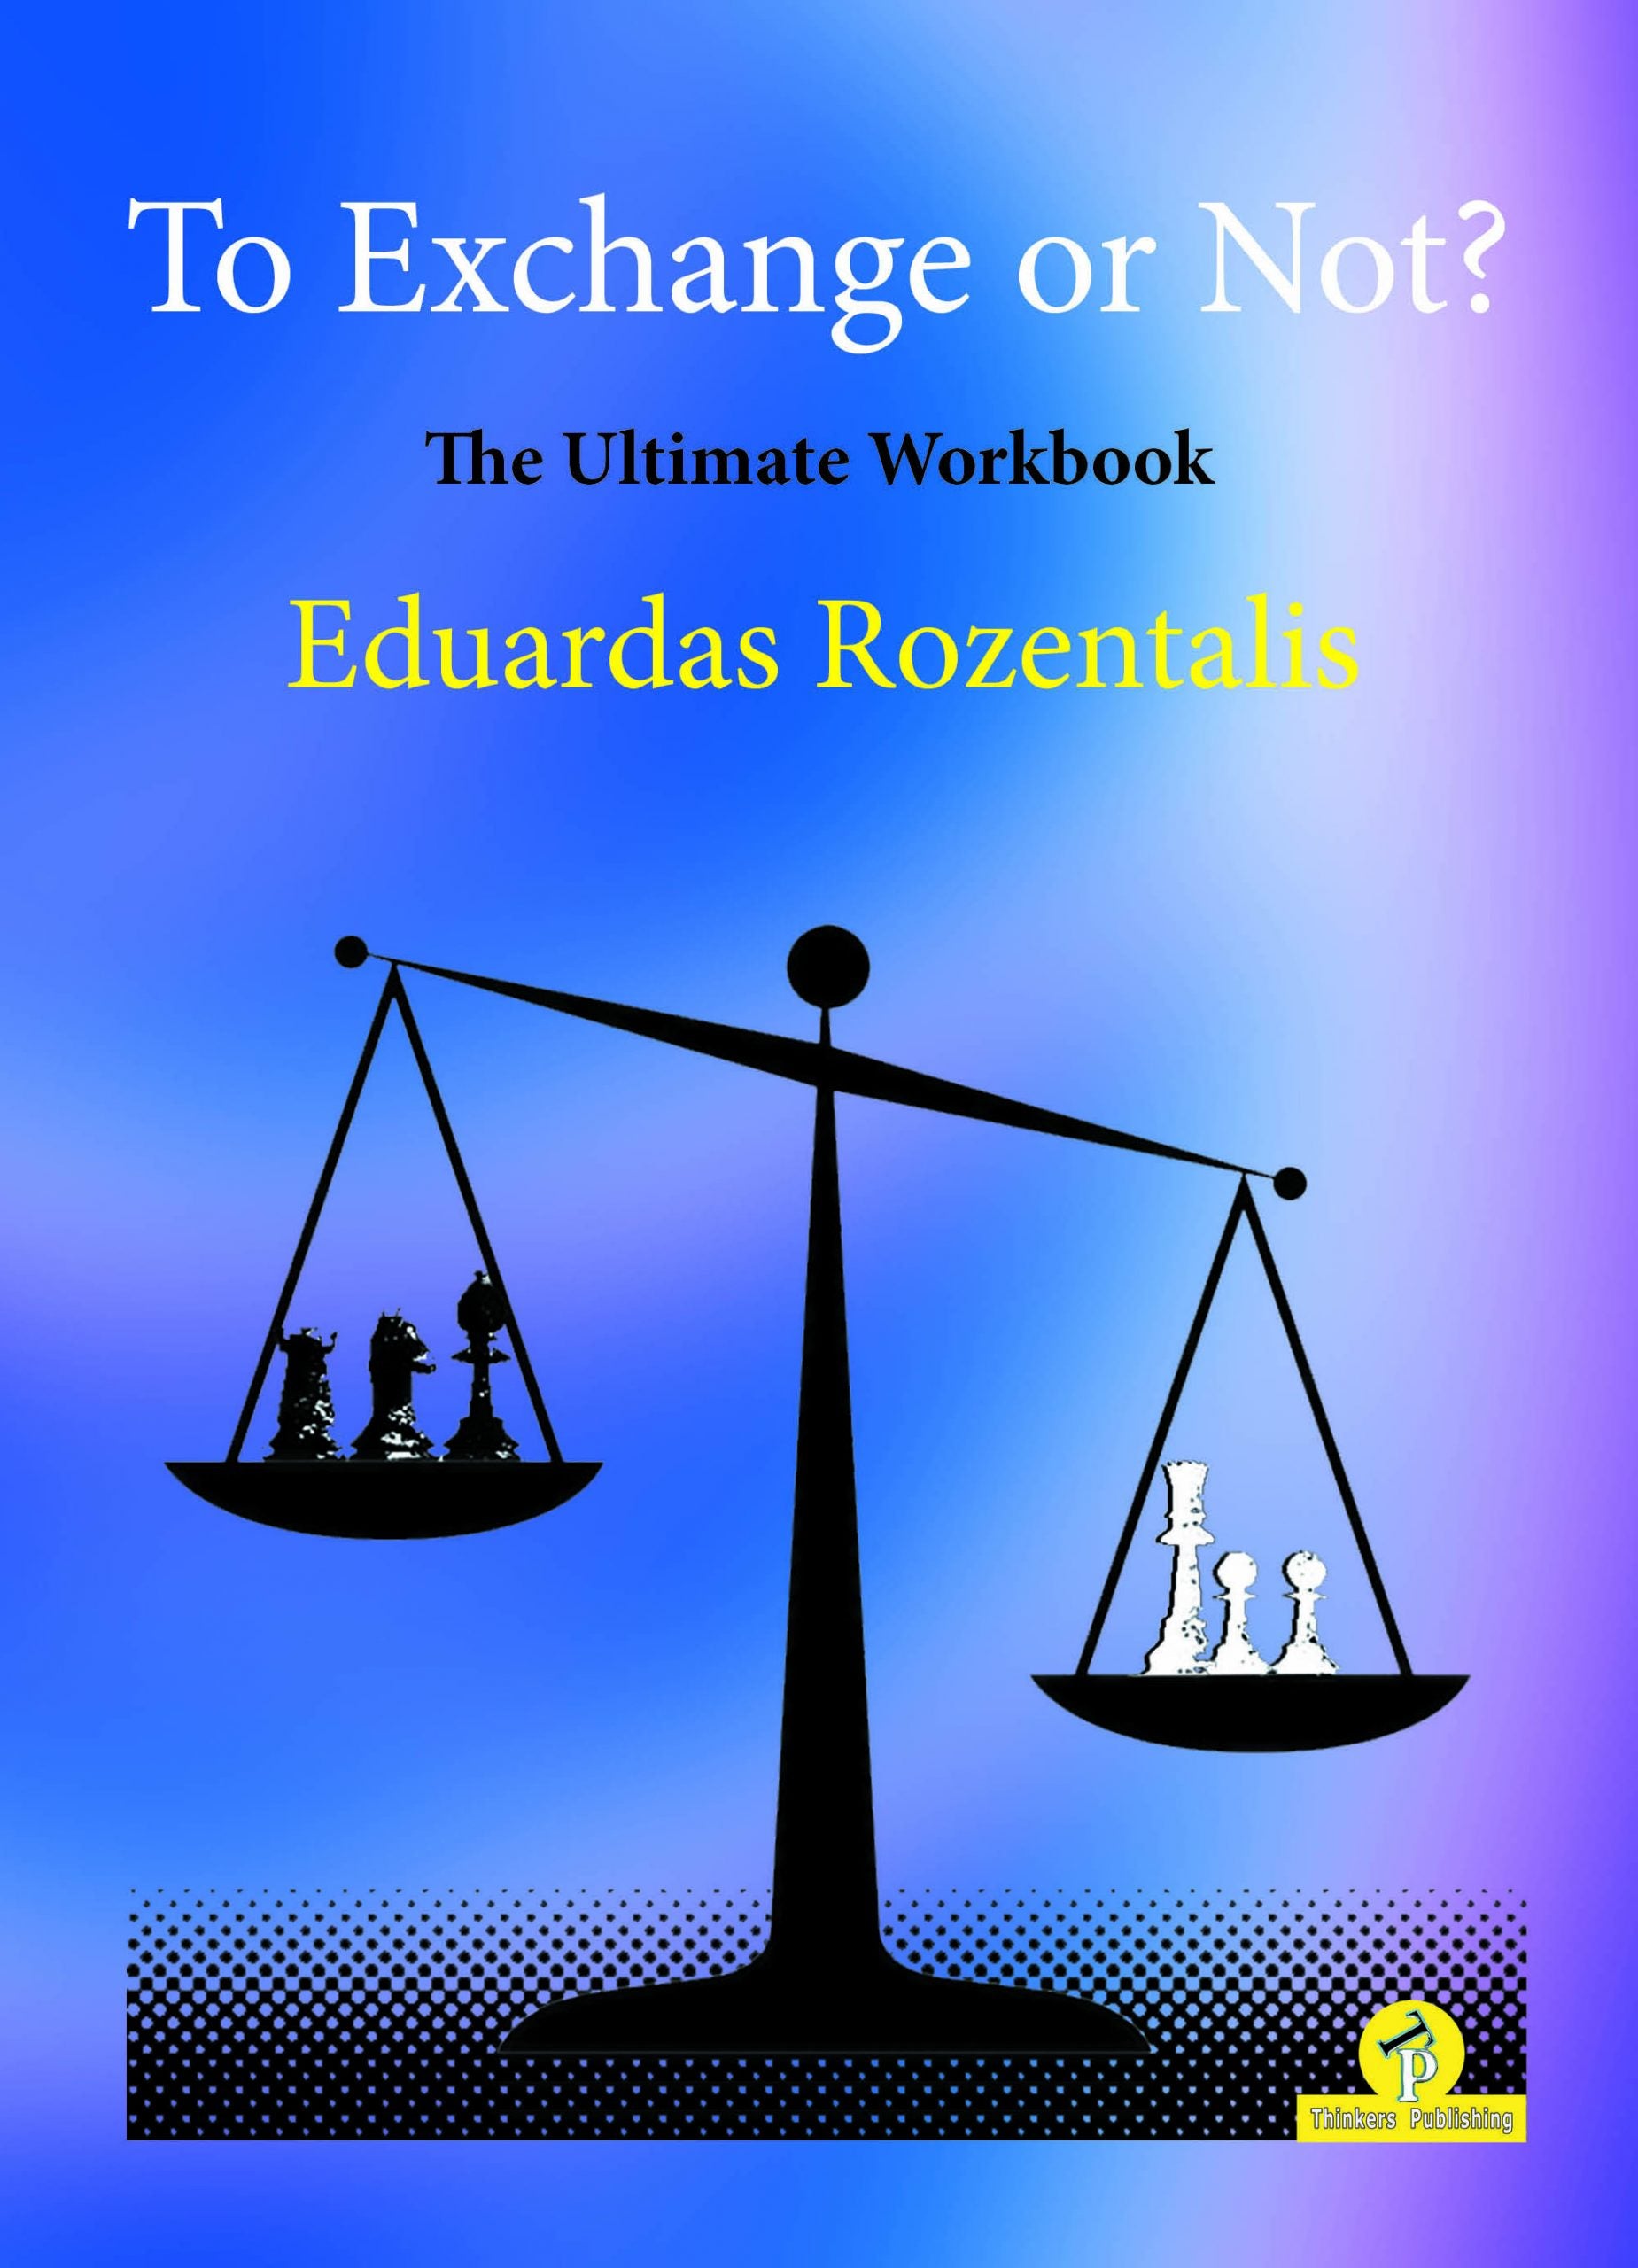 Rozentalis: To Exchange or Not? The Ultimate Workbook